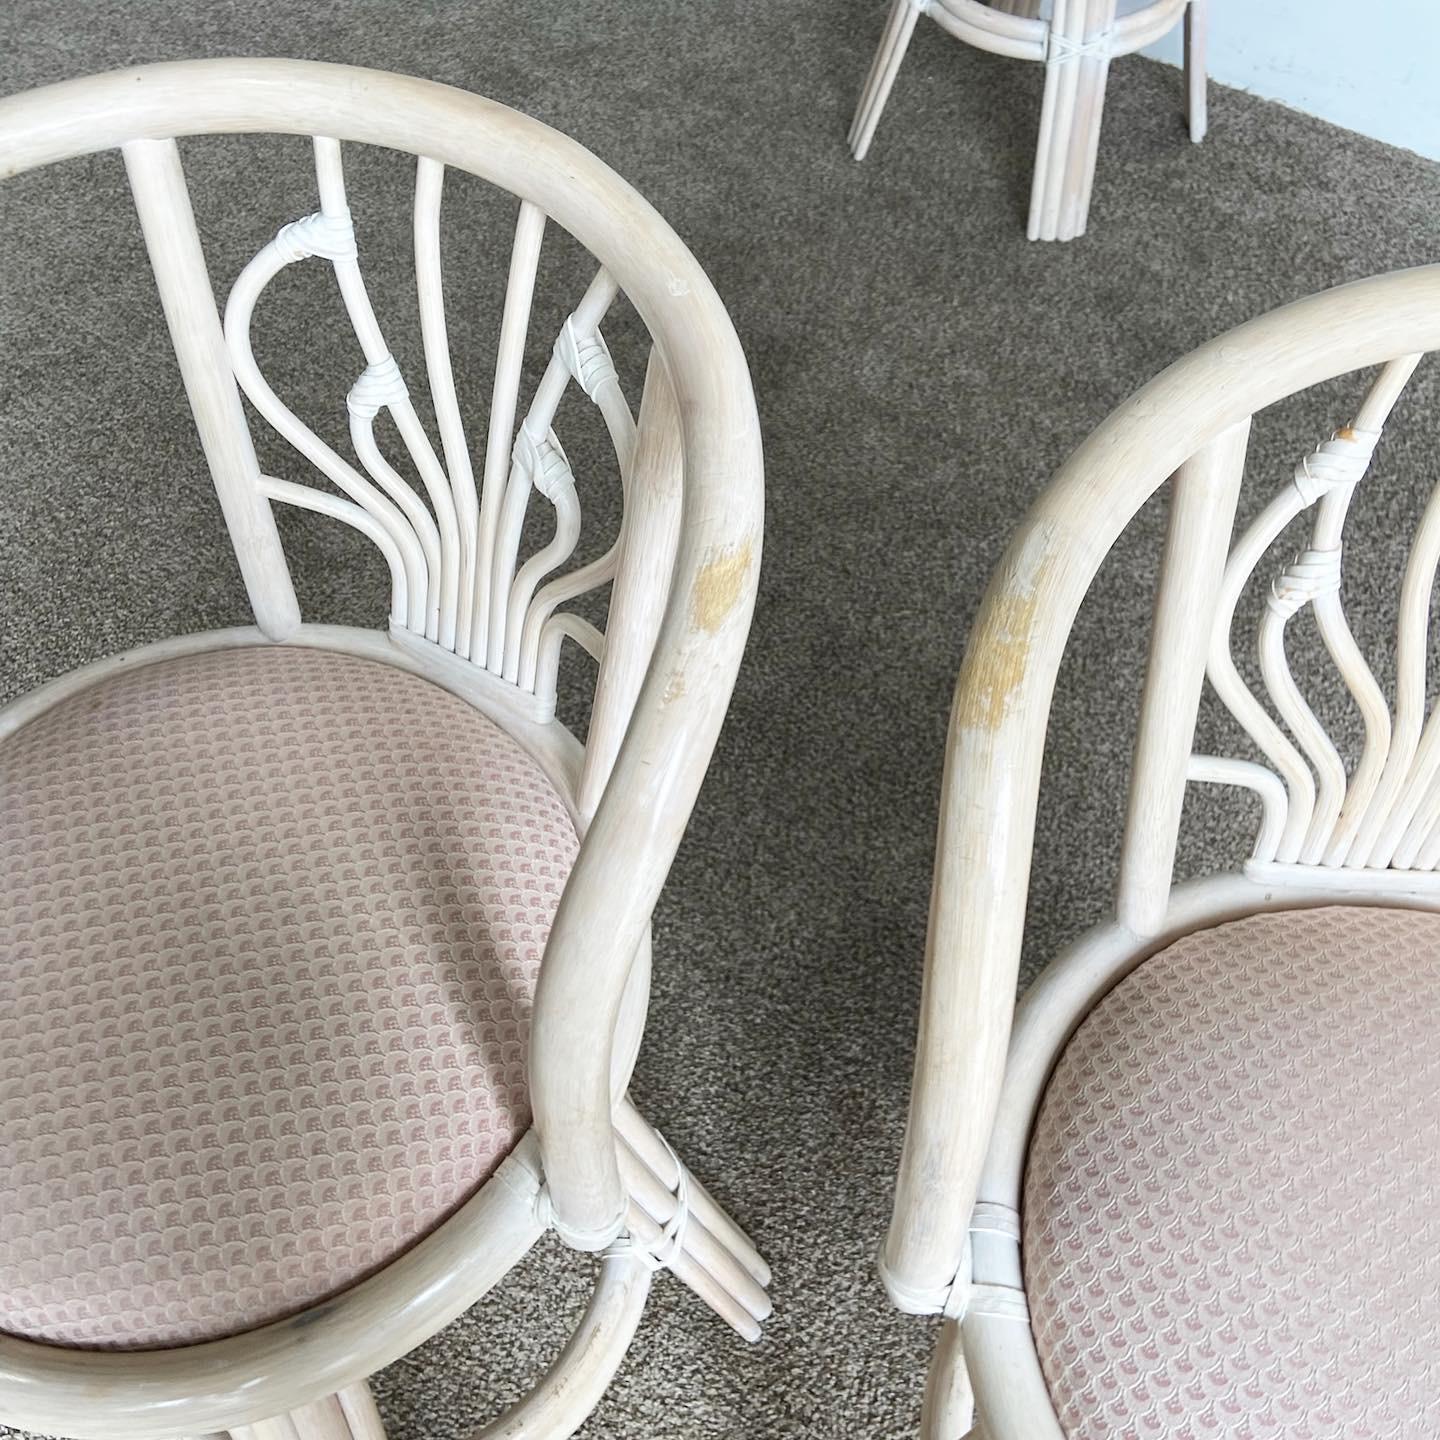 Boho Chic Bamboo Rattan Swivel Bar Stools - Set of 4 In Good Condition For Sale In Delray Beach, FL